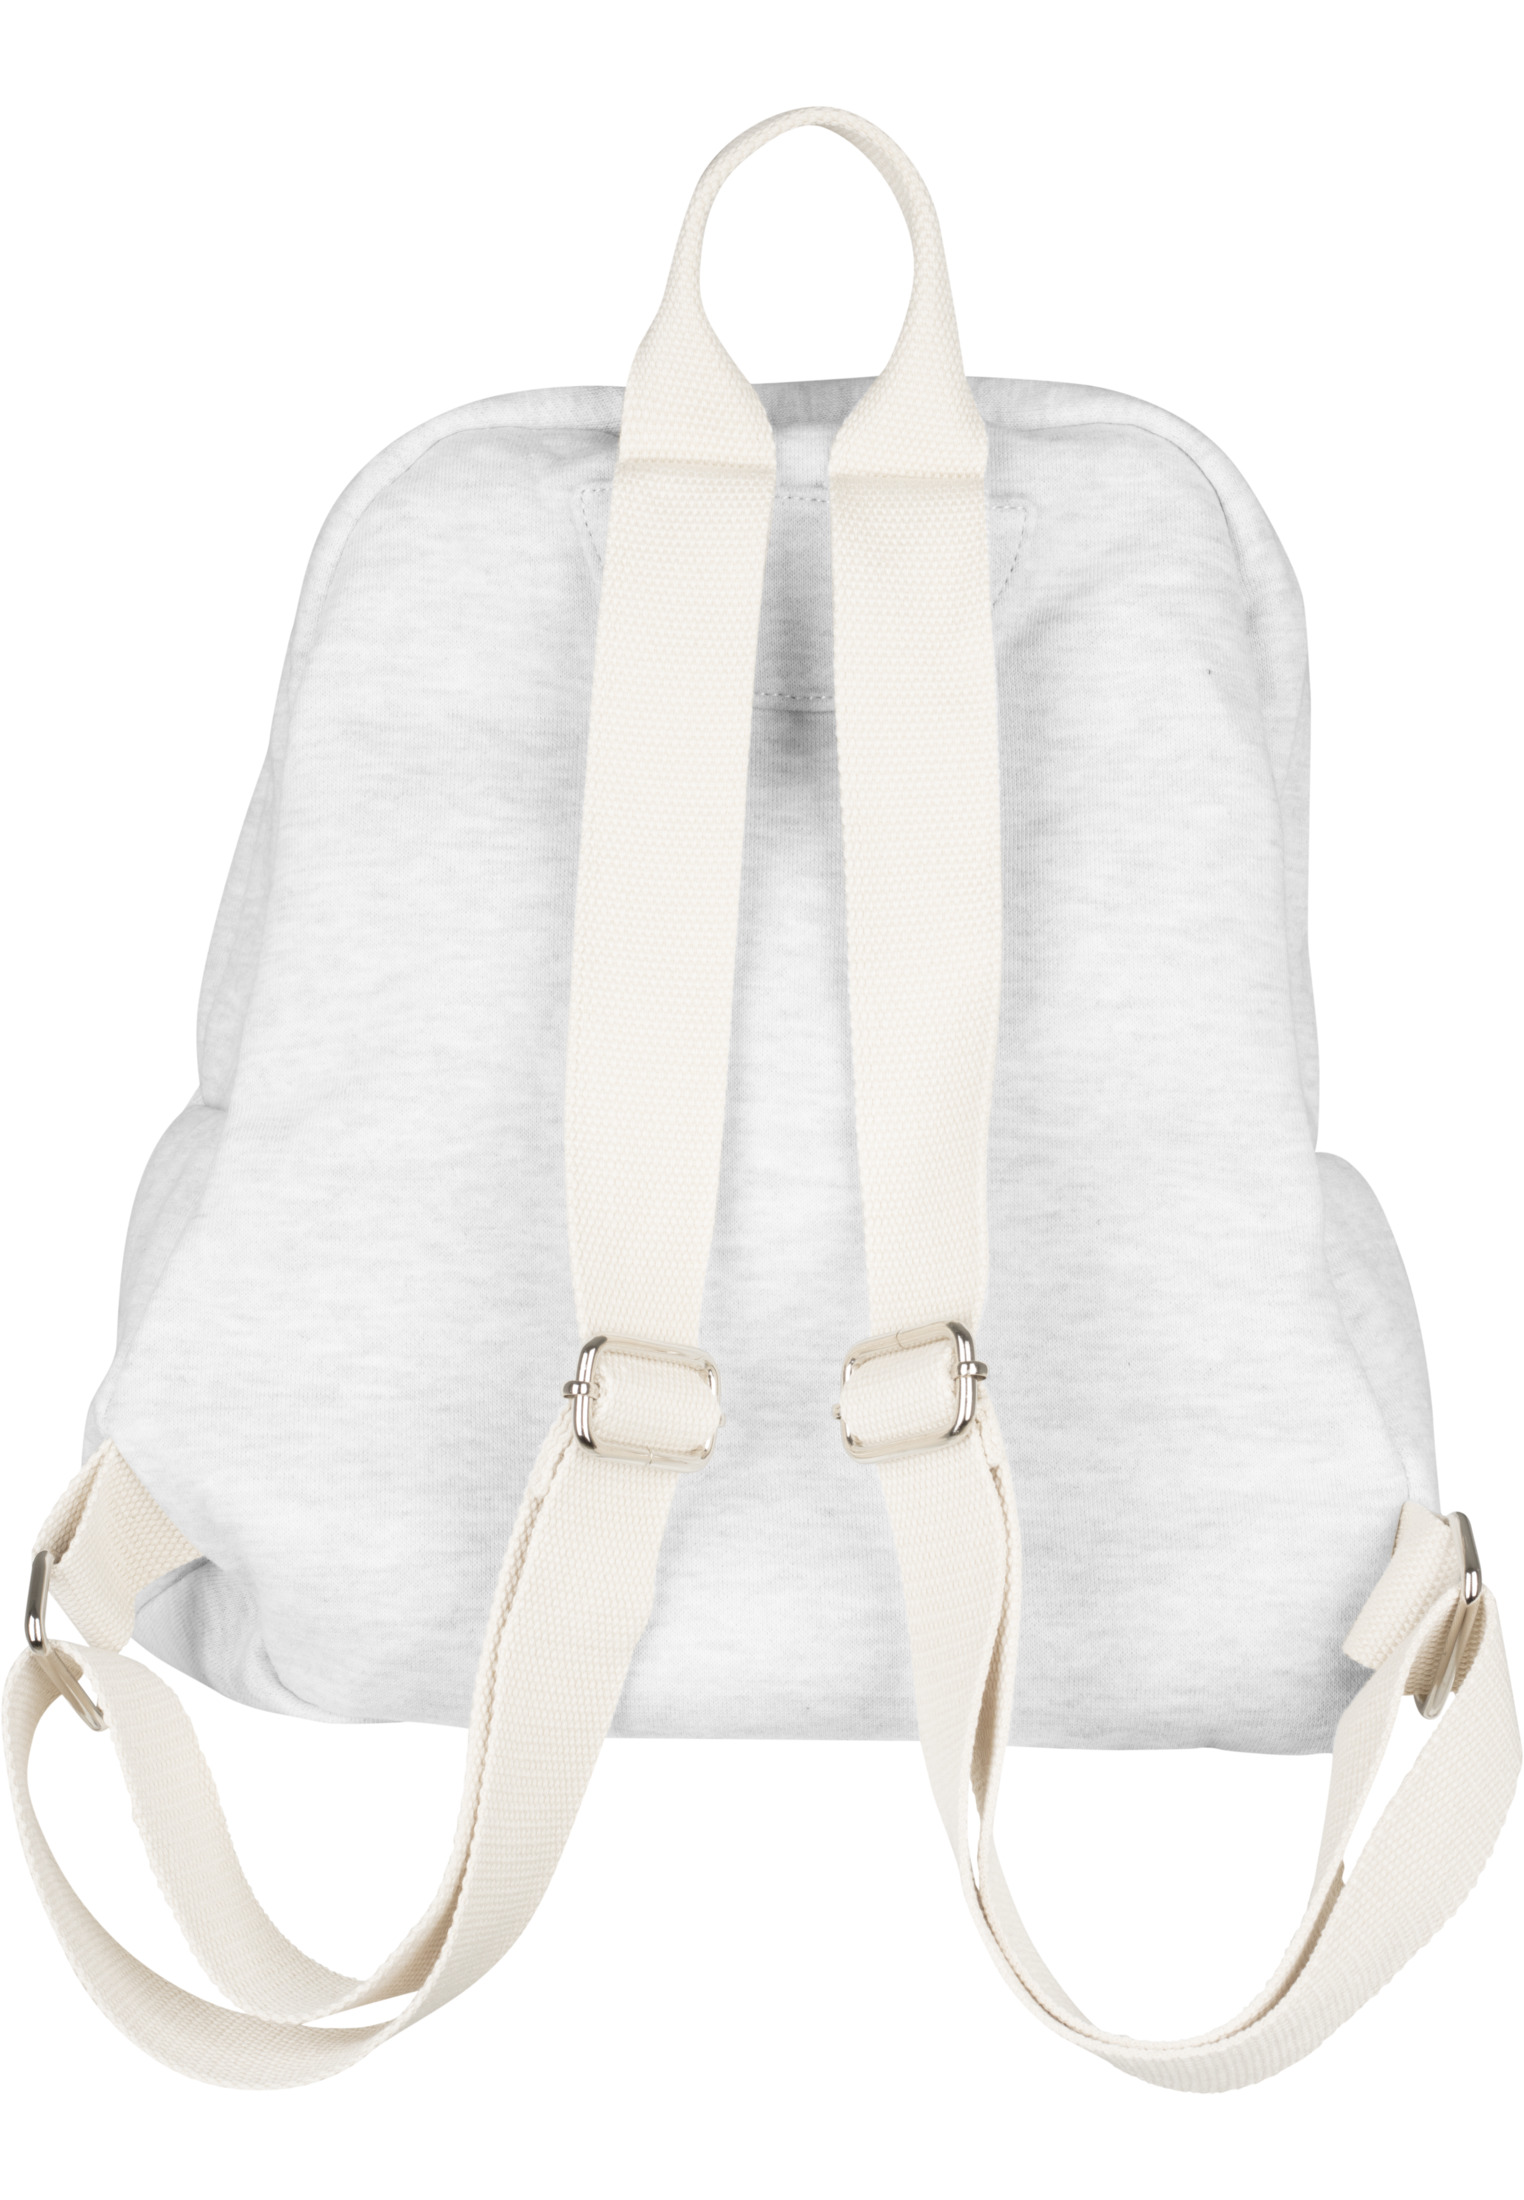 Taschen Sweat Backpack in Farbe offwhite melange/offwhite